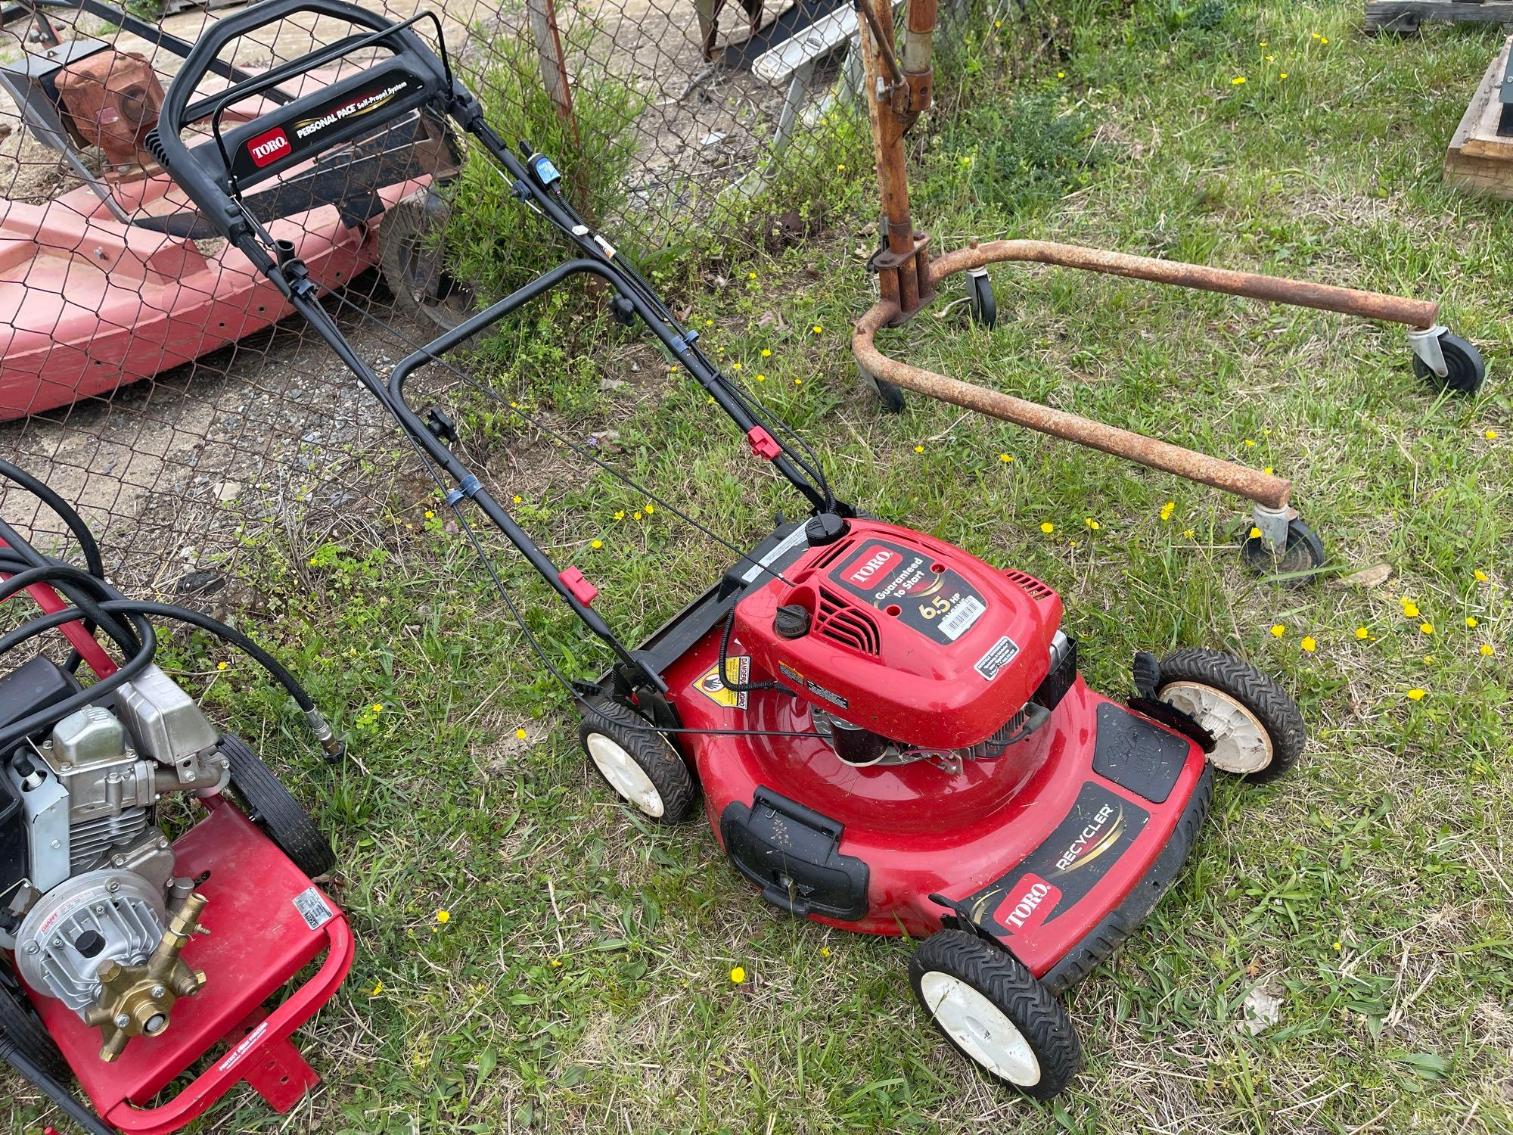 Image for TORO Self Propelled Mower, per seller-used less than 25 hours but has not been run in 3 years